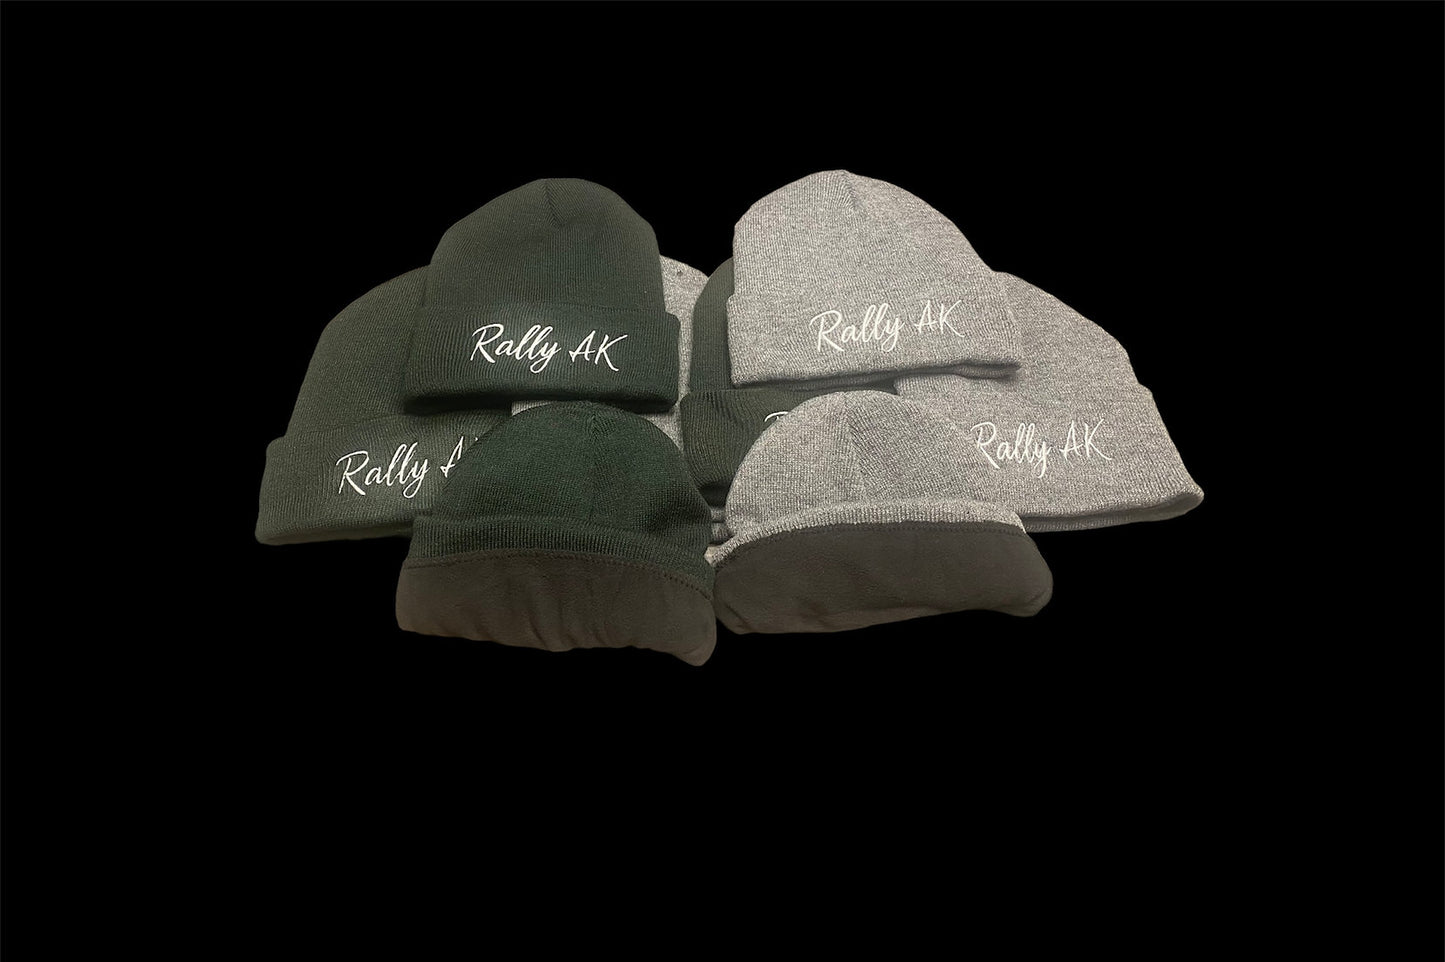 Fleece Lined Embroidered Beanies-Discontinued